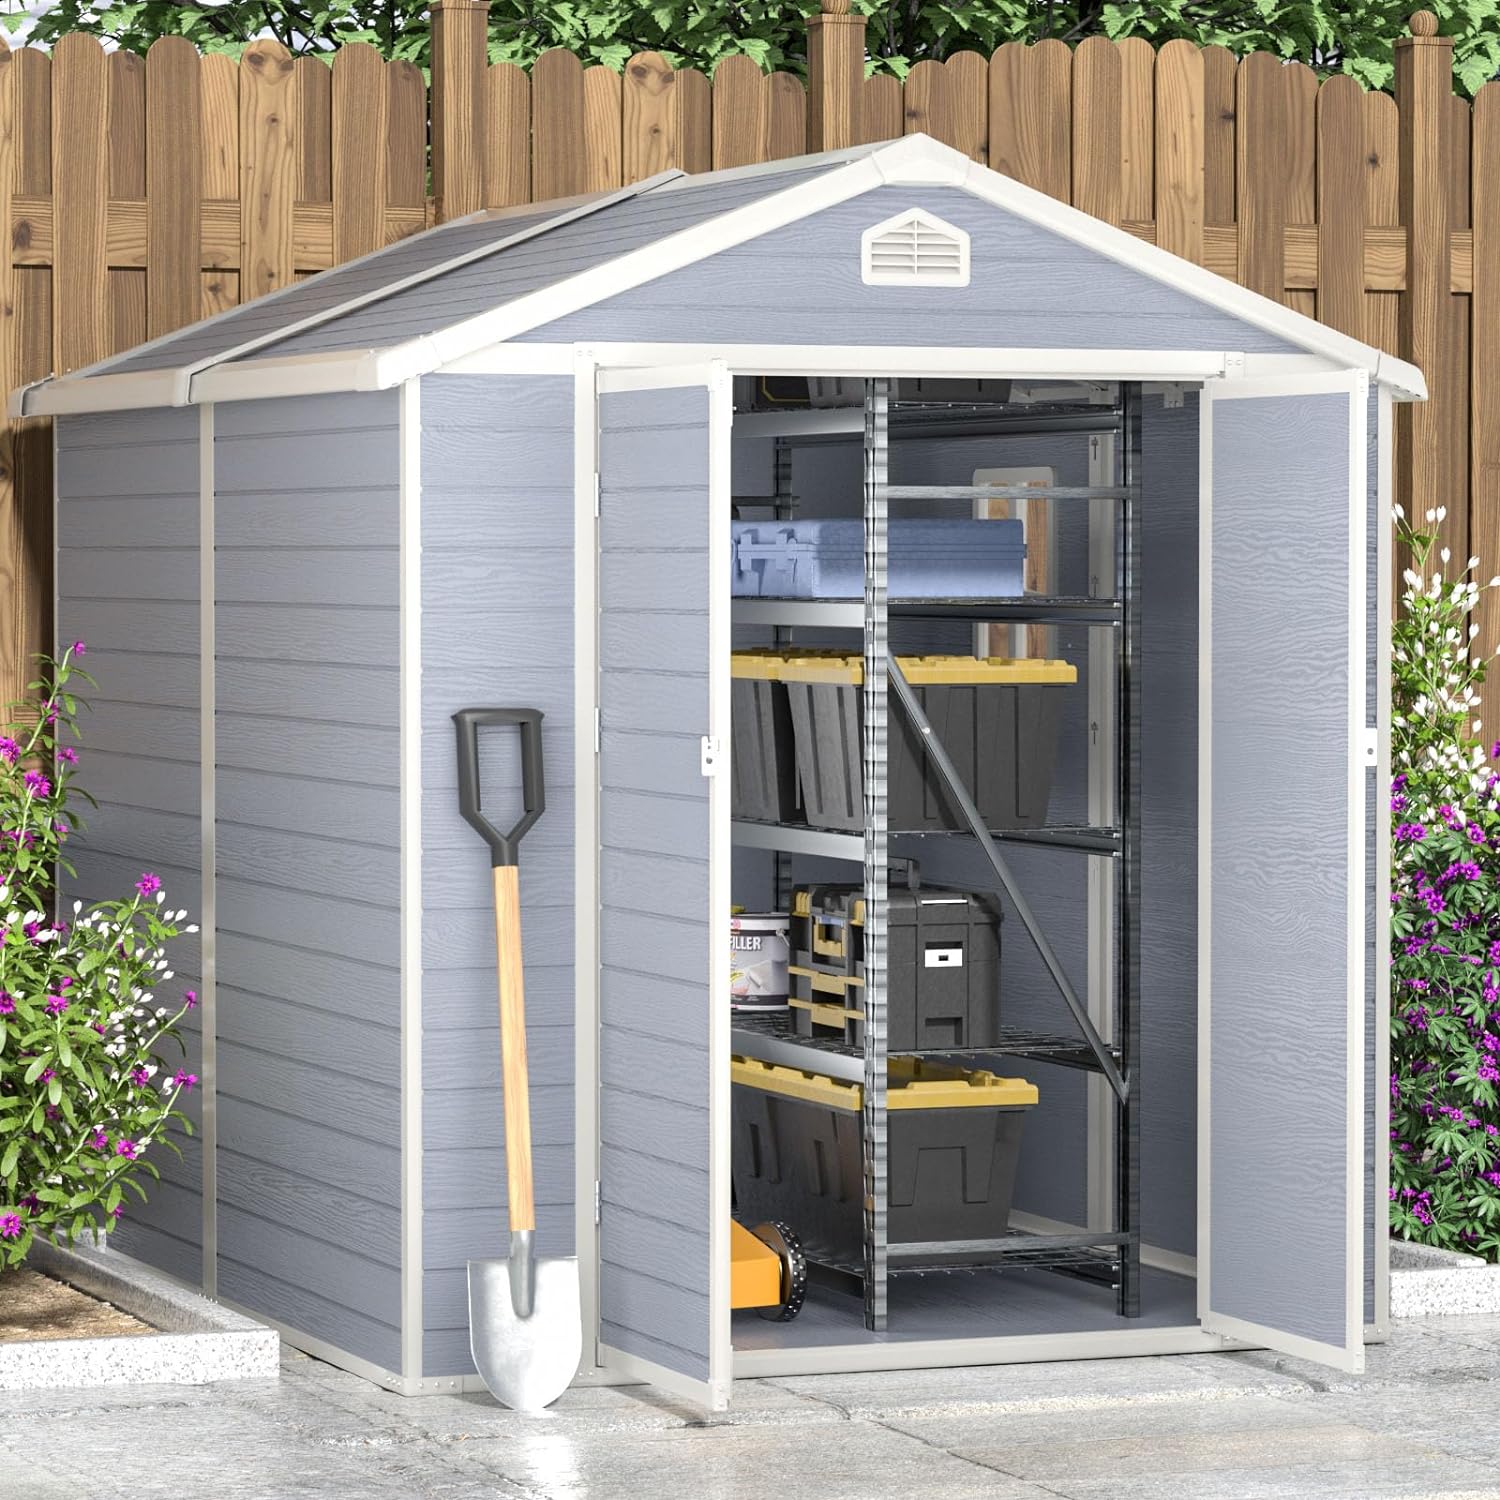 6’ x 8’ Resin Outdoor Storage Shed, Utility Tool Shed Storage House,  Gray